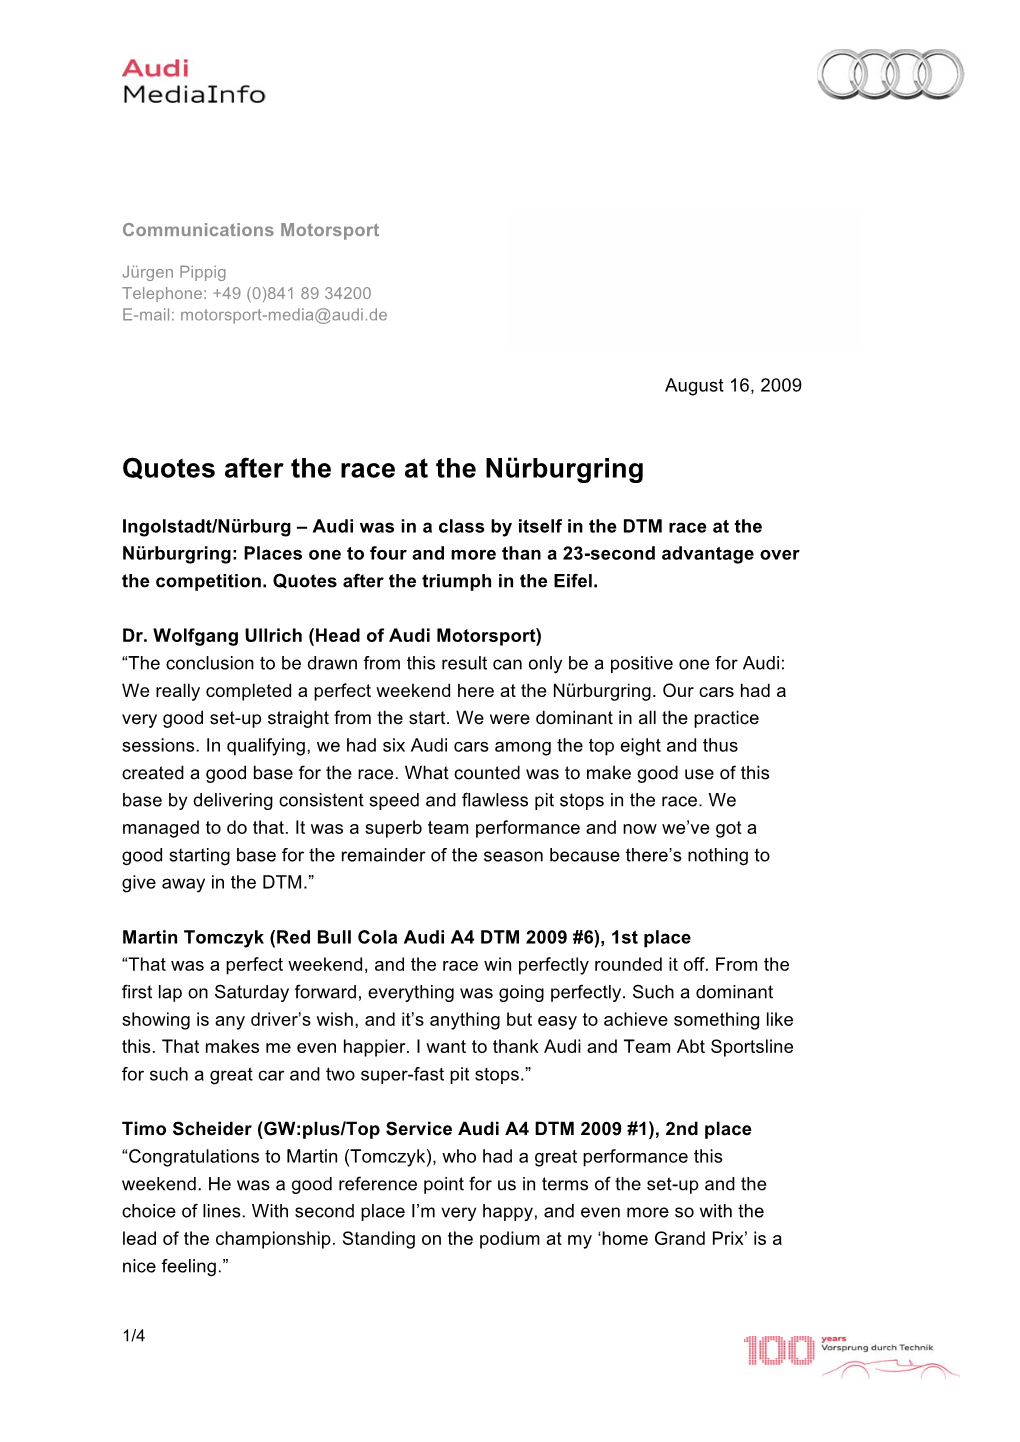 Quotes After the Race at the Nürburgring